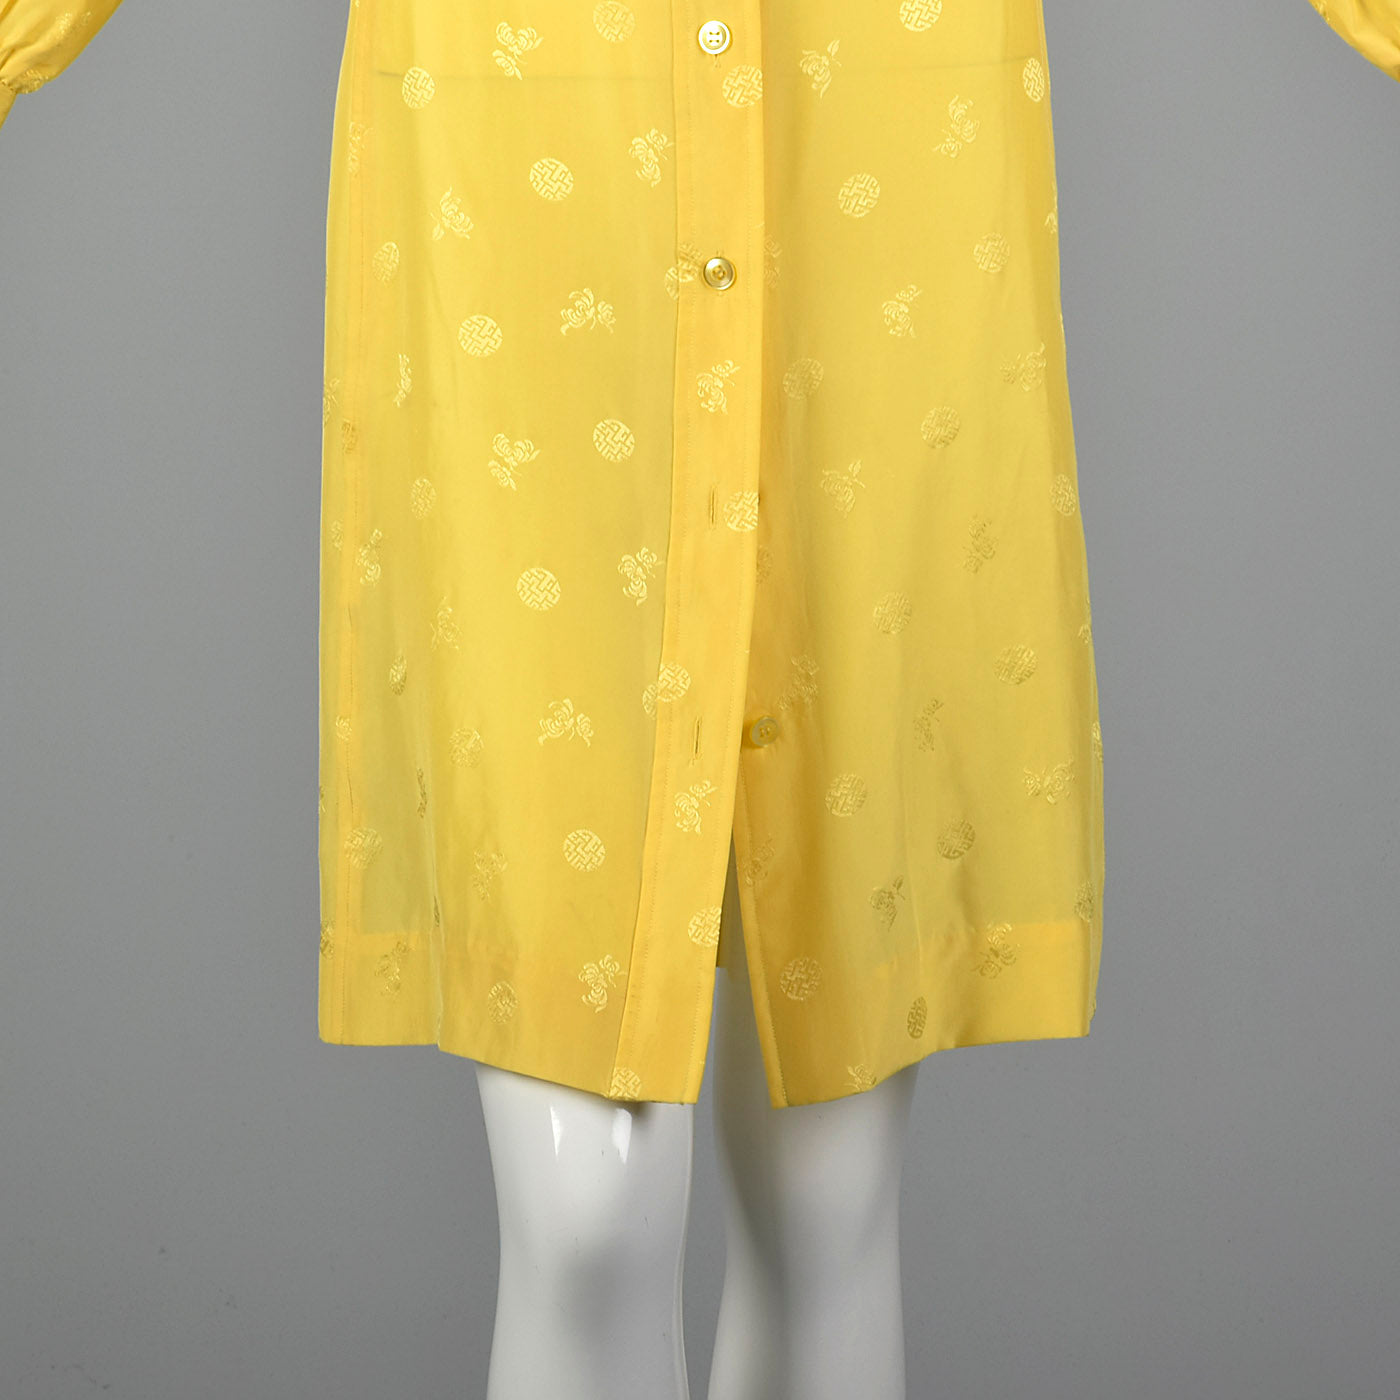 1970s Yellow Day Dress with Belted Waist